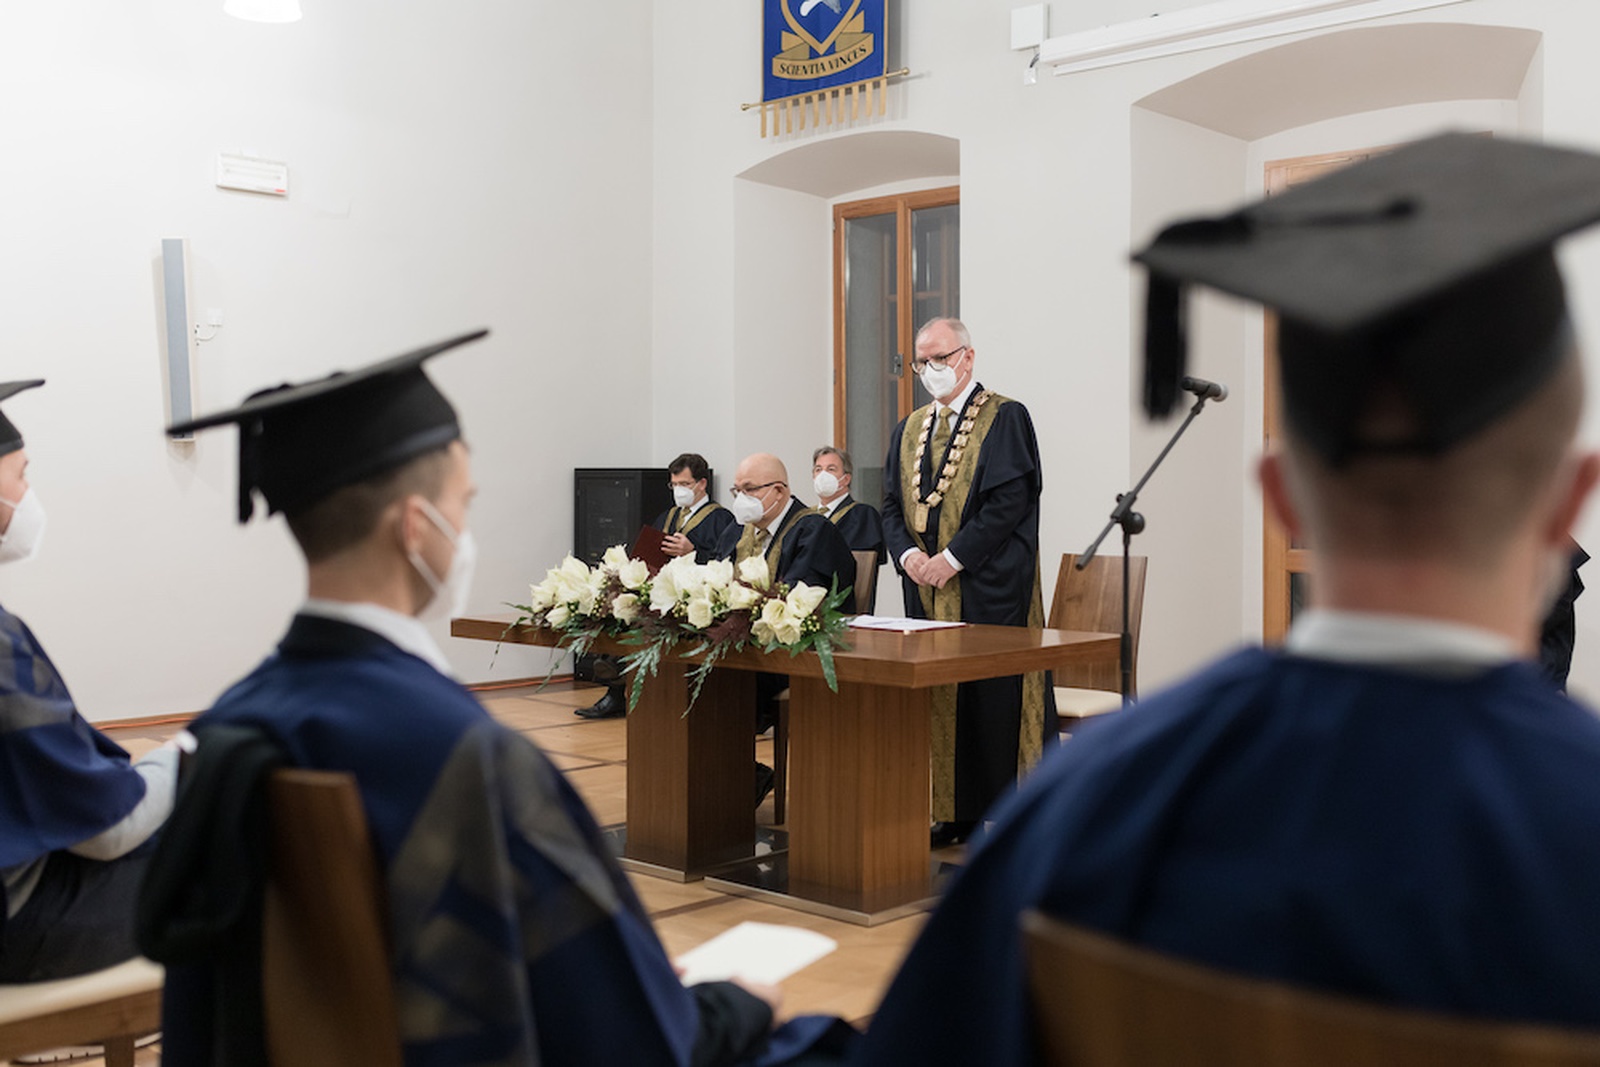 Rector, Vice-rector and Deans of the University of Nova Gorica. Photo: Miha Godec